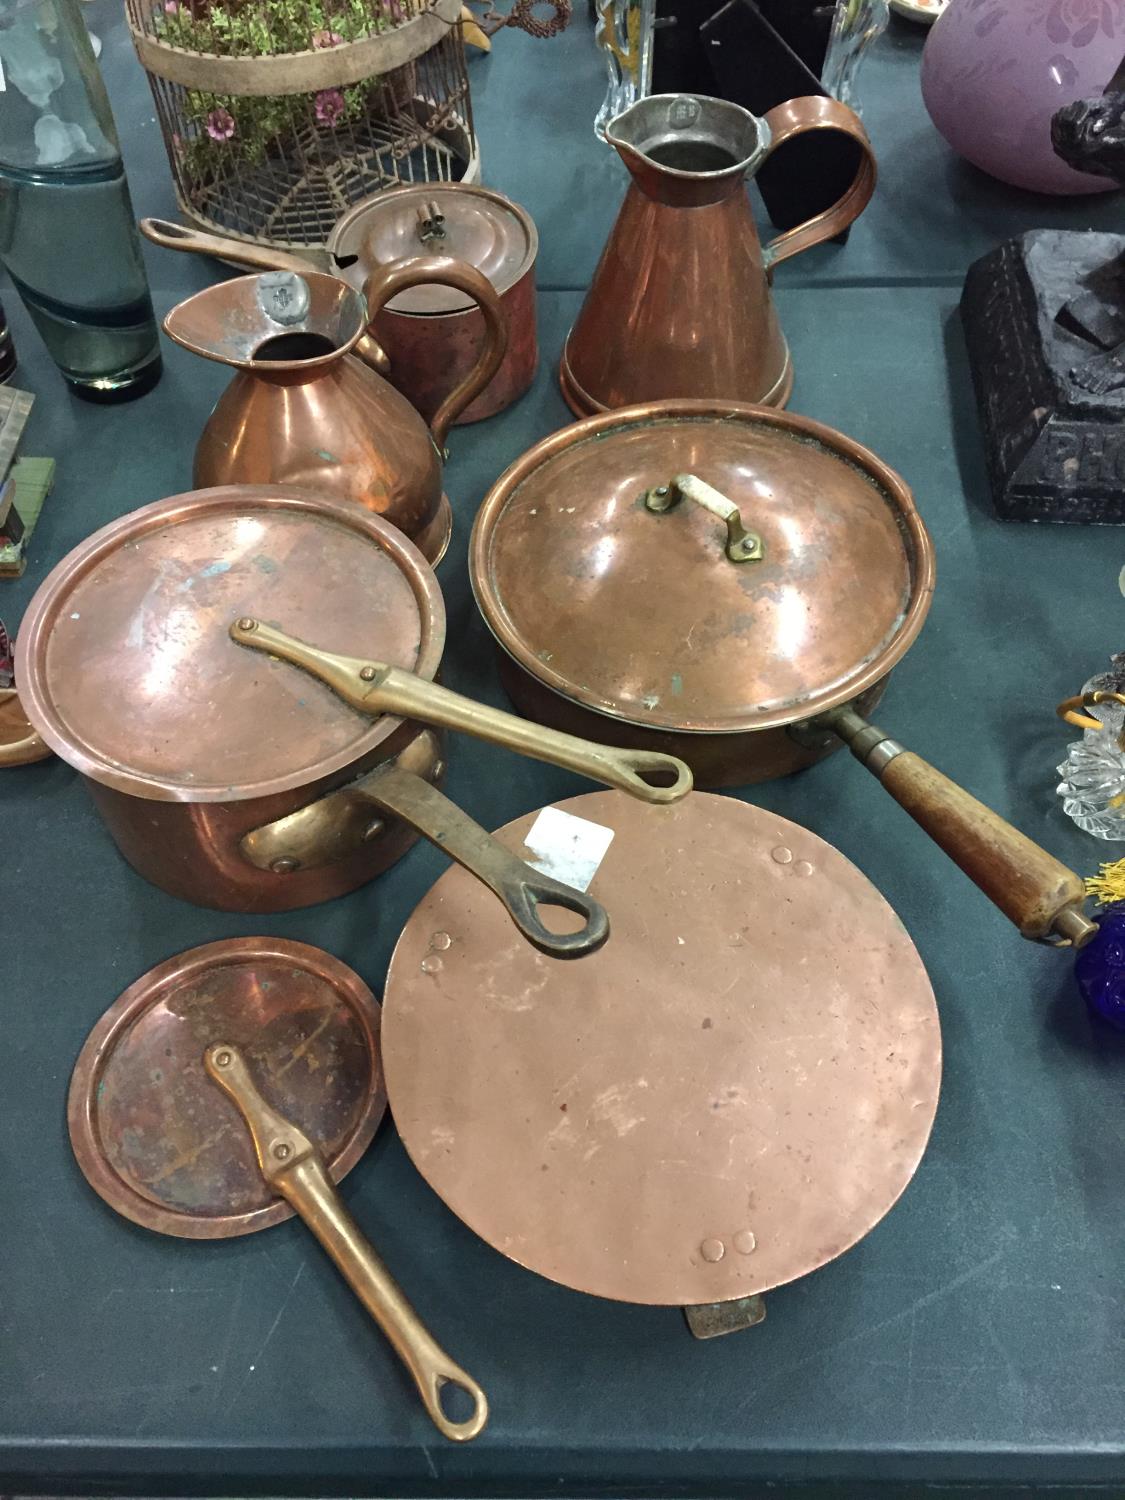 A QUANTITY OF COPPERWARE TO INCLUDE TWO QUART JUGS ONE WITH THE NAME G & J OLIVER LONDON, COPPER